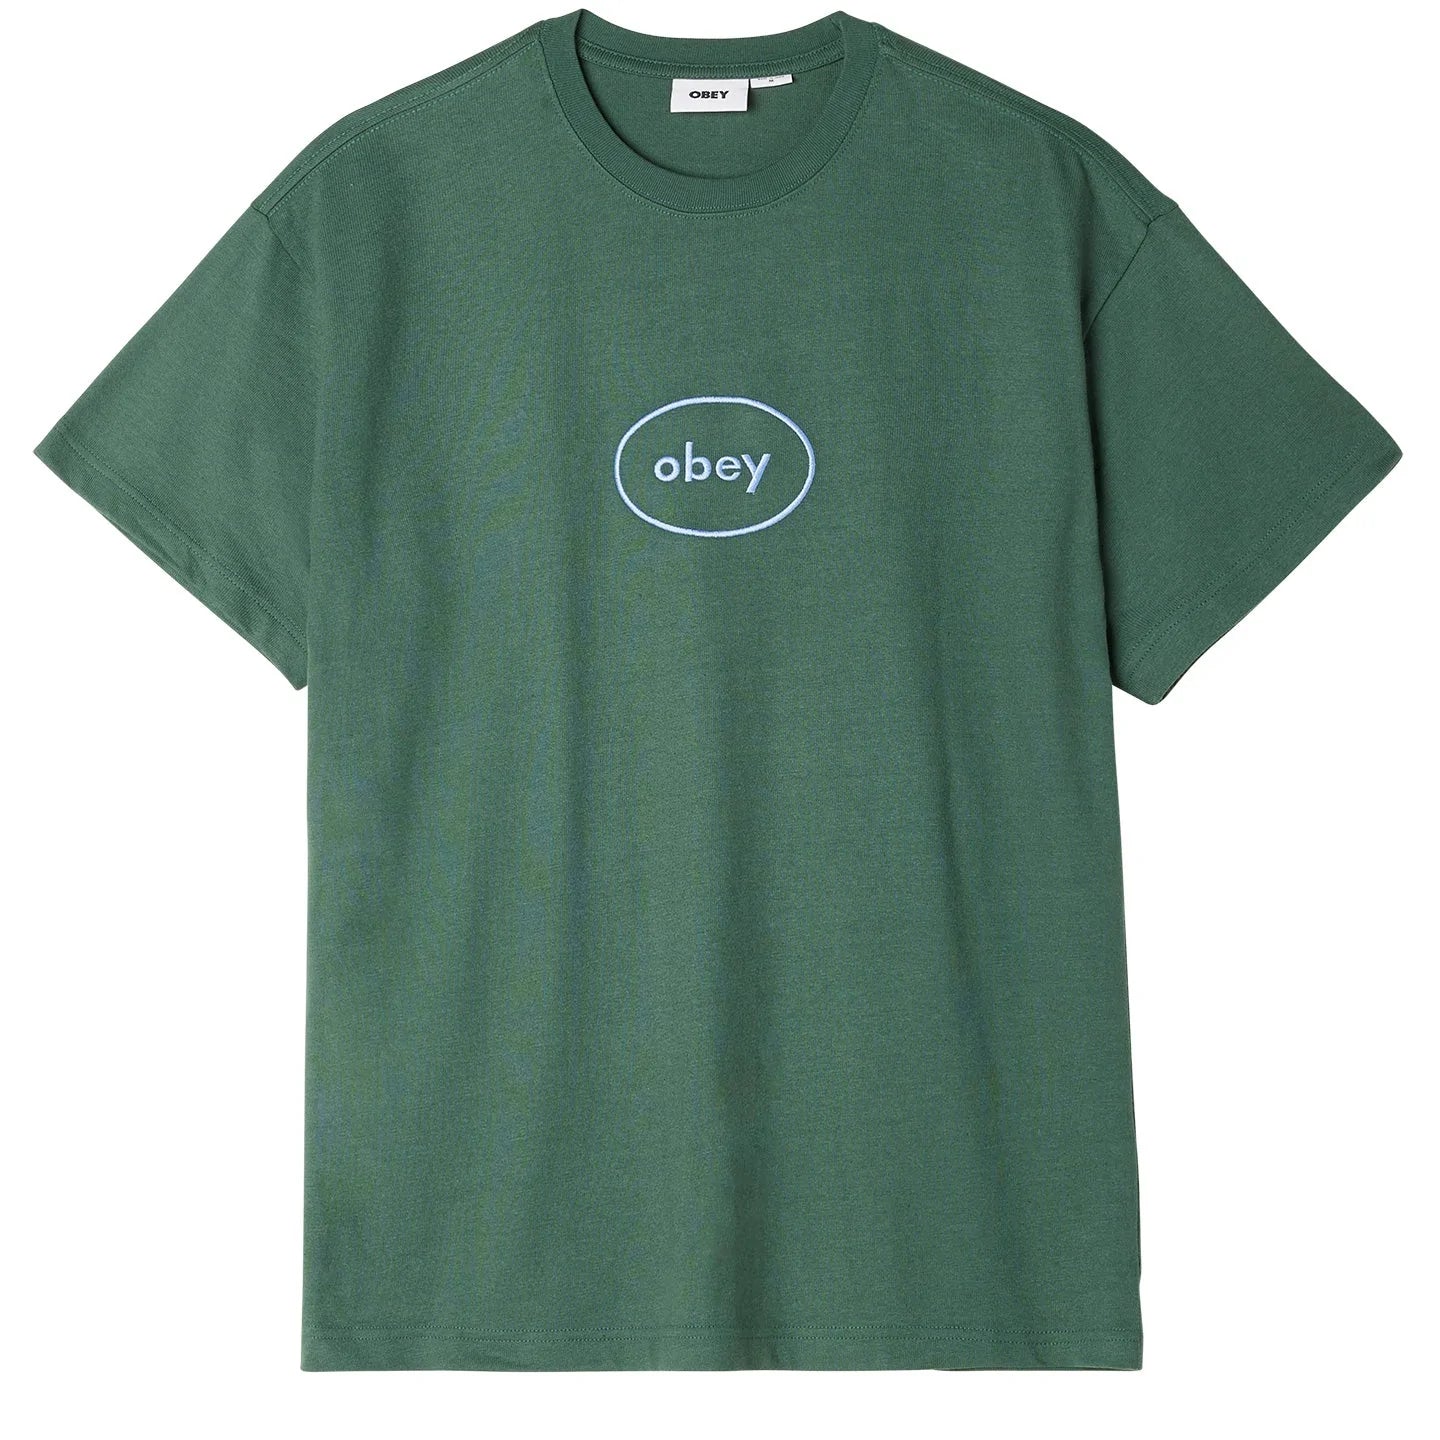 OBEY - Ovale tee